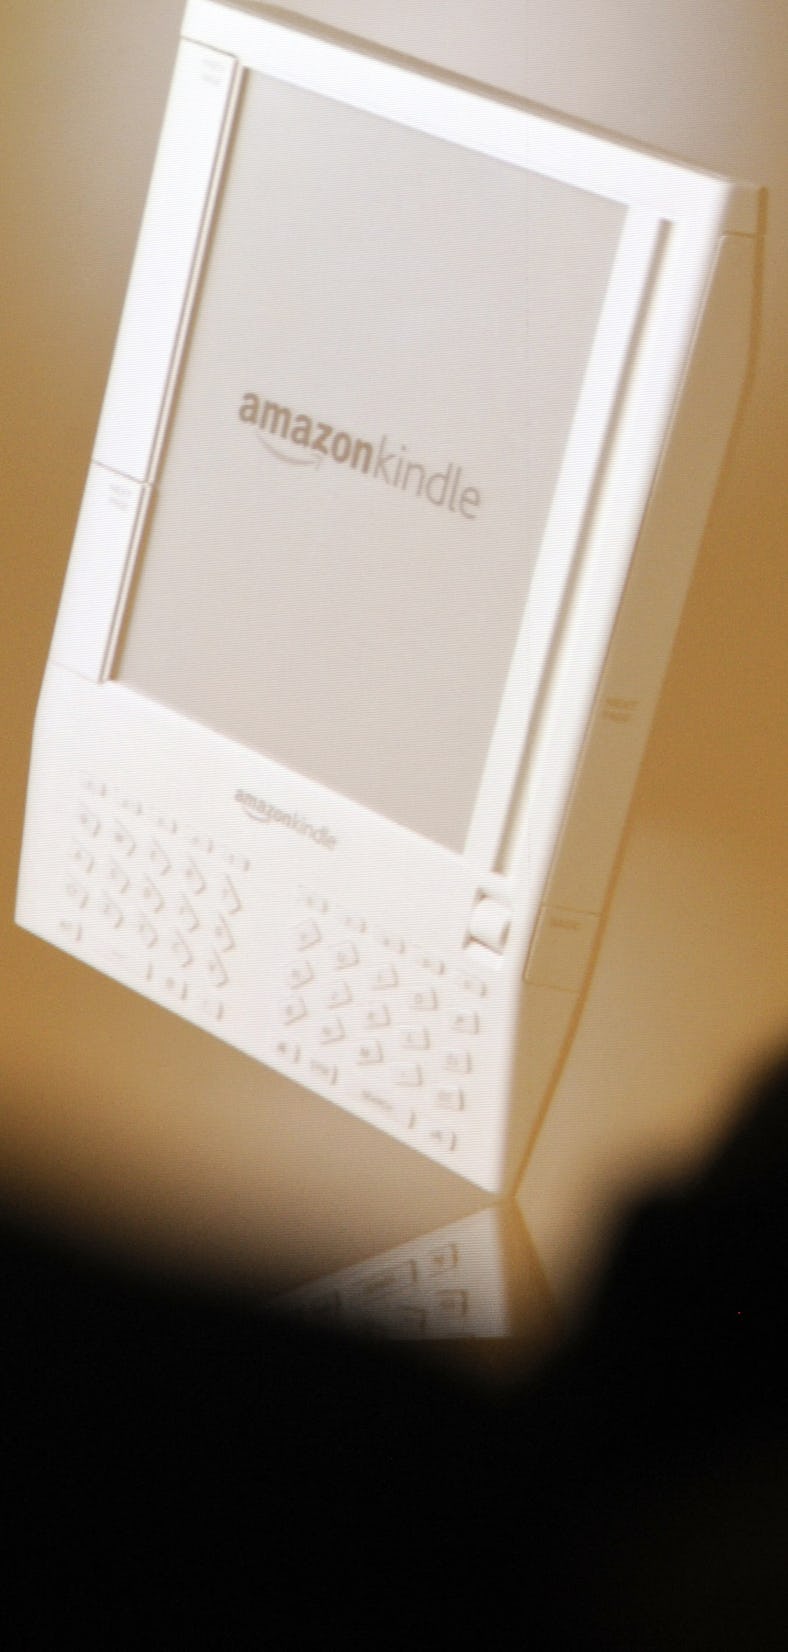 Visitors attend a presentation of Amazon's new e-reader device "Kindle" at the Frankfurt Book Fair O...